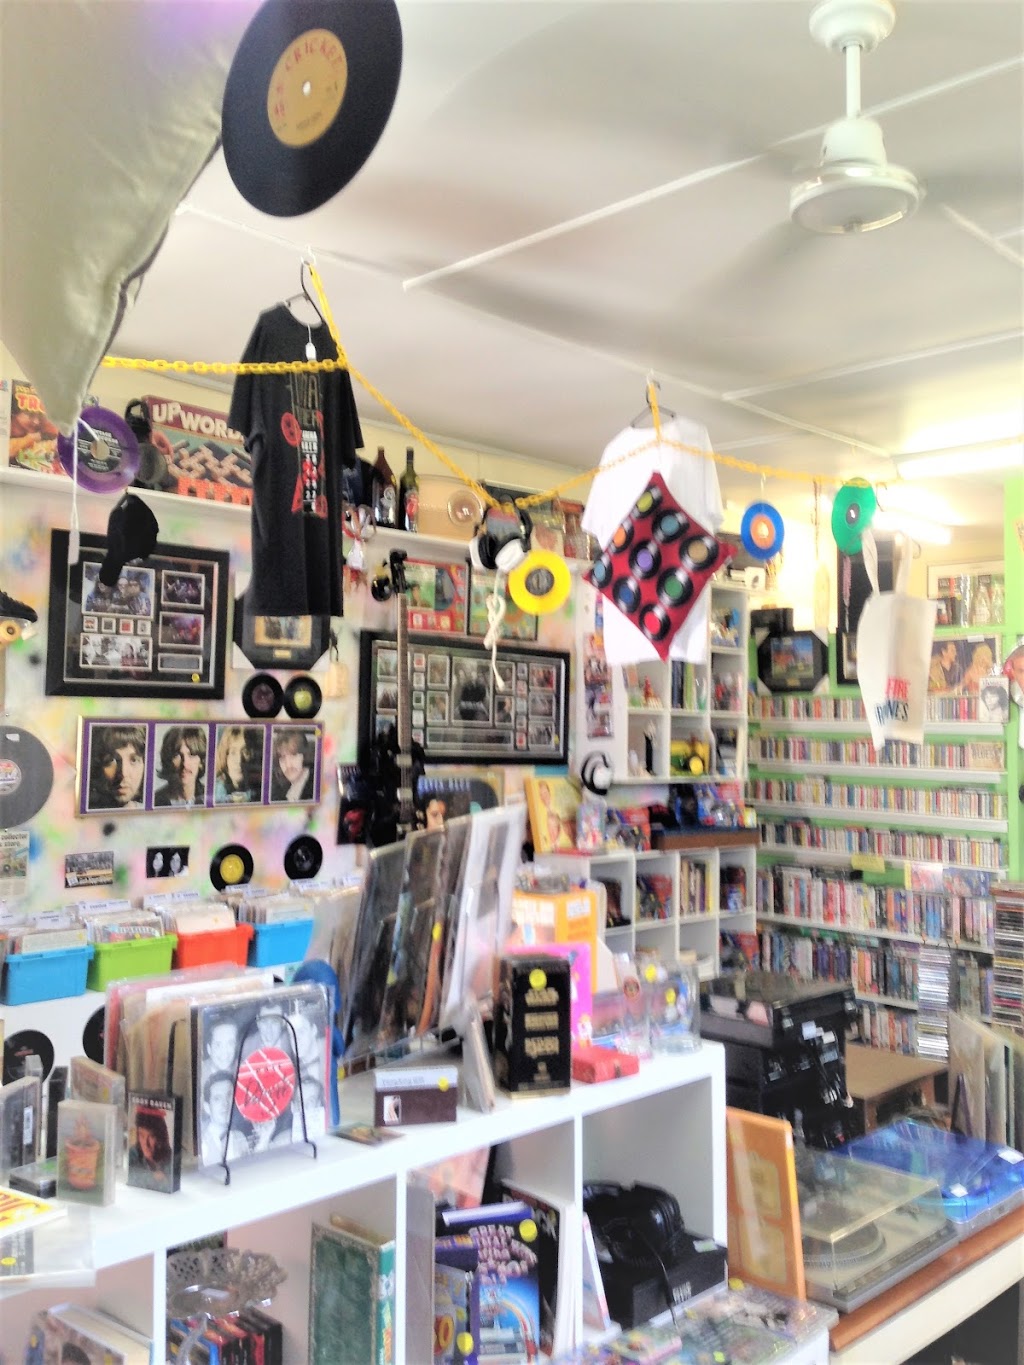 Cool Rockn Records | electronics store | 8B Queens Rd, Scarness QLD 4655, Australia | 0404461261 OR +61 404 461 261